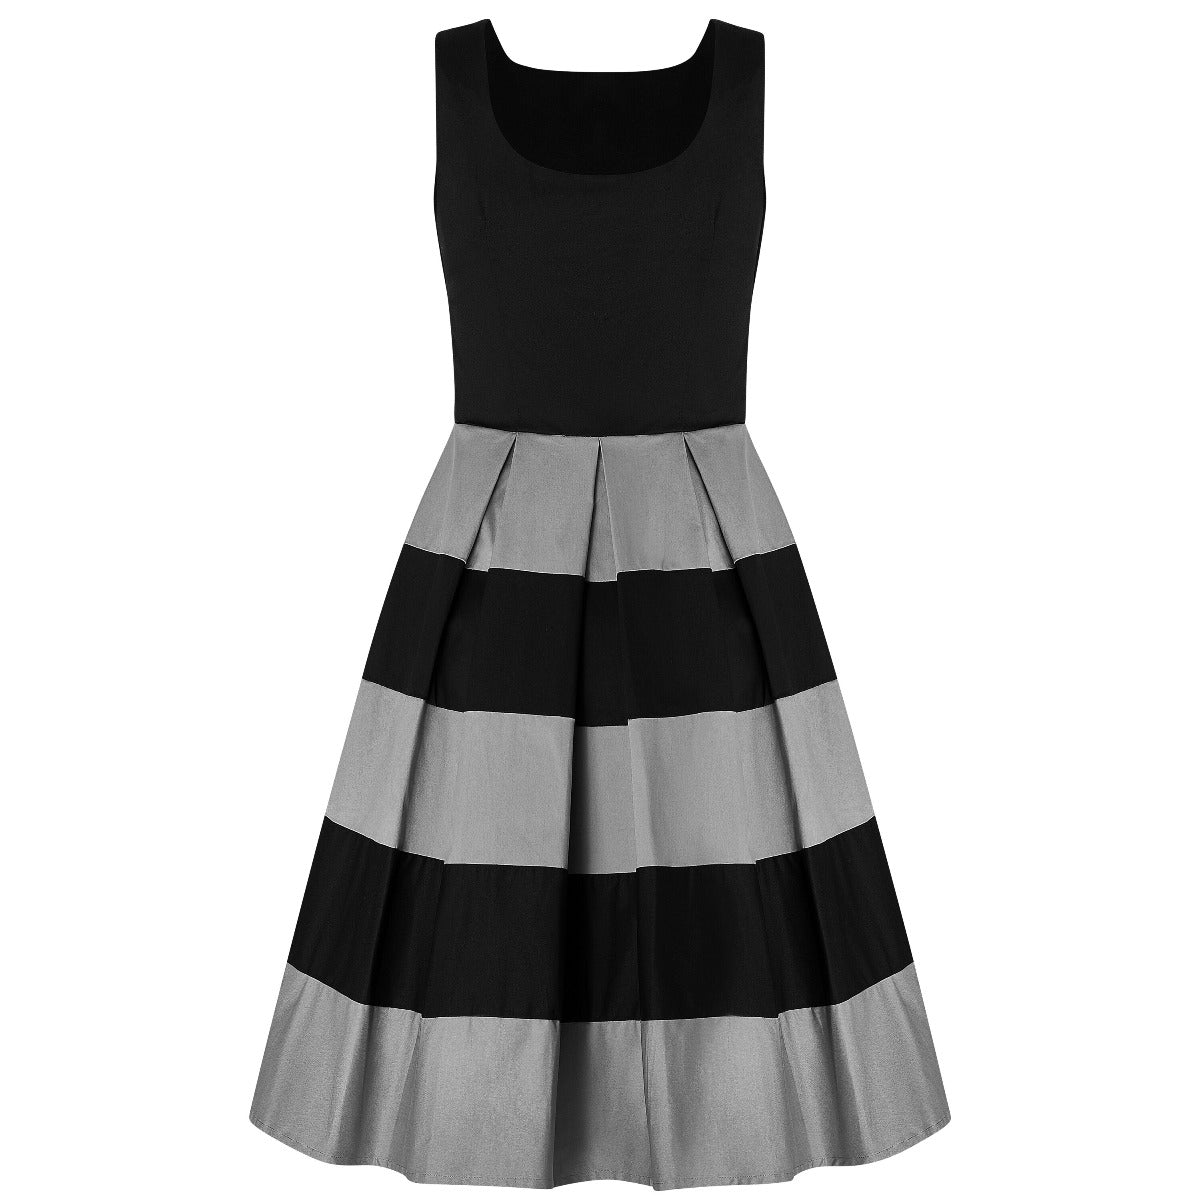 Anna Adorable Striped Swing Dress in Black-Grey